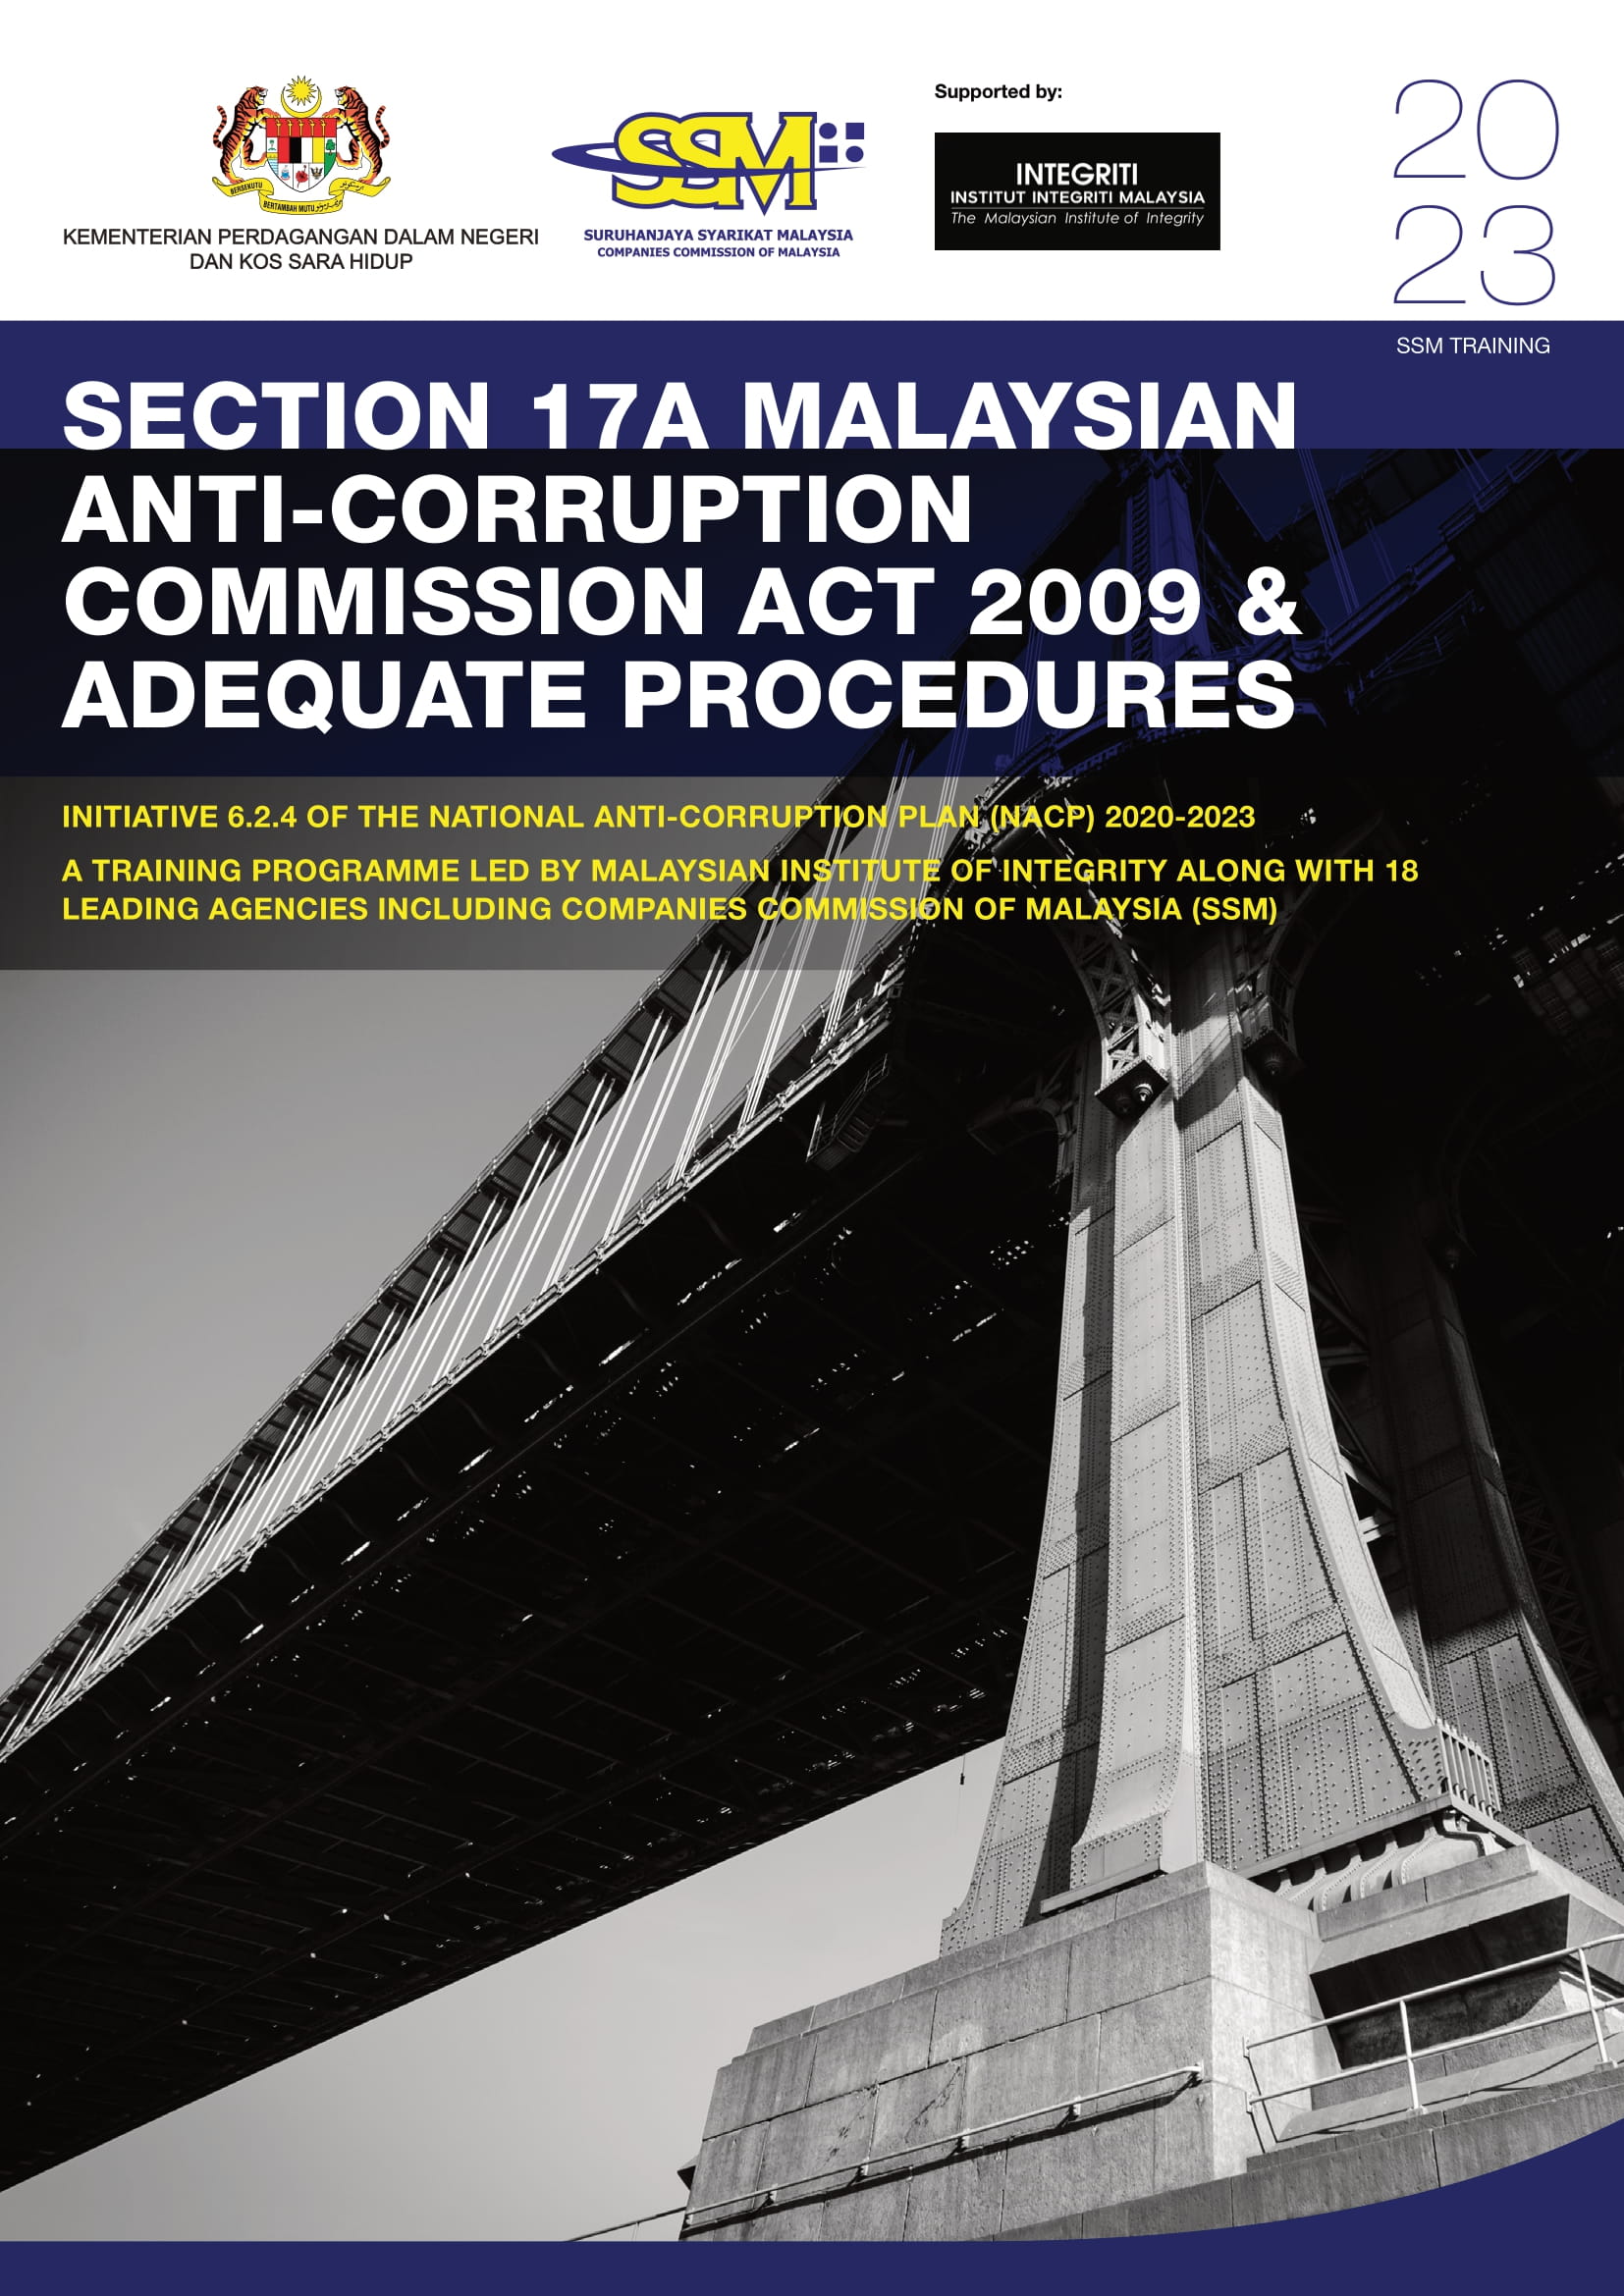 SECTION 17A MALAYSIAN ANTI-CORRUPTION COMMISSION ACT 2009 _ ADEQUATE PROCEDURES-1.jpg